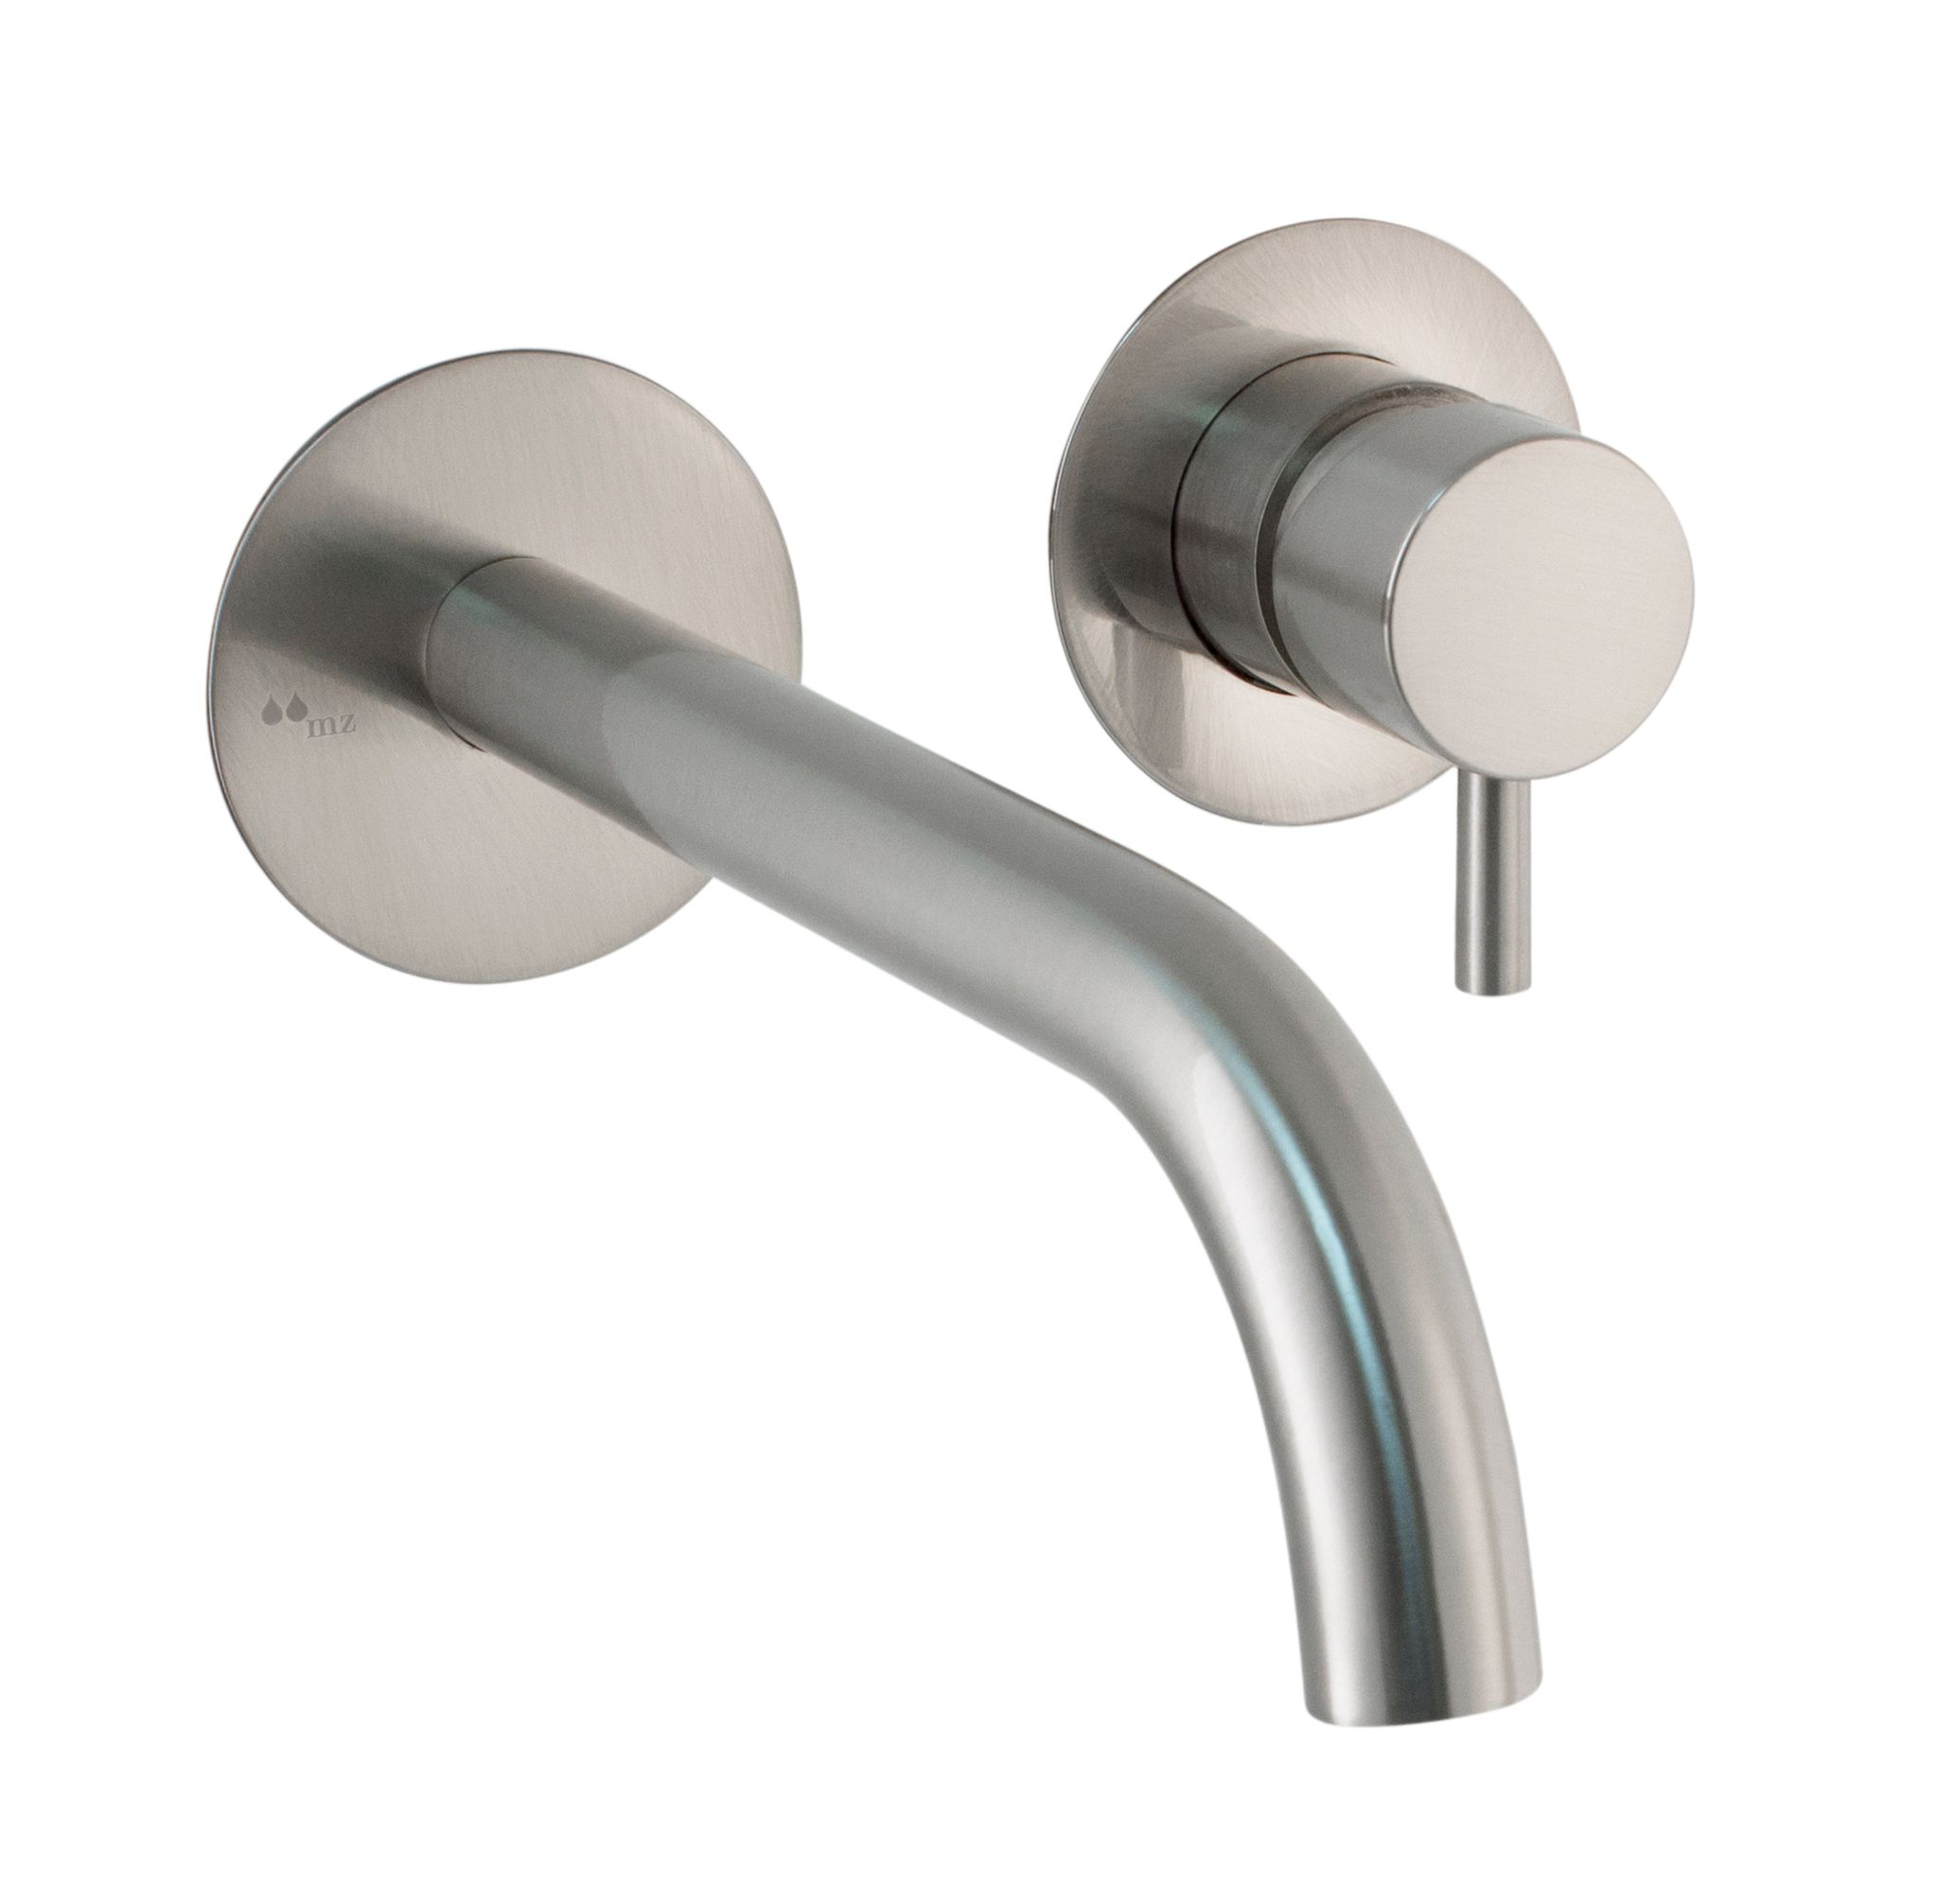 Built-in- Single Lever Faucet | Porcemall